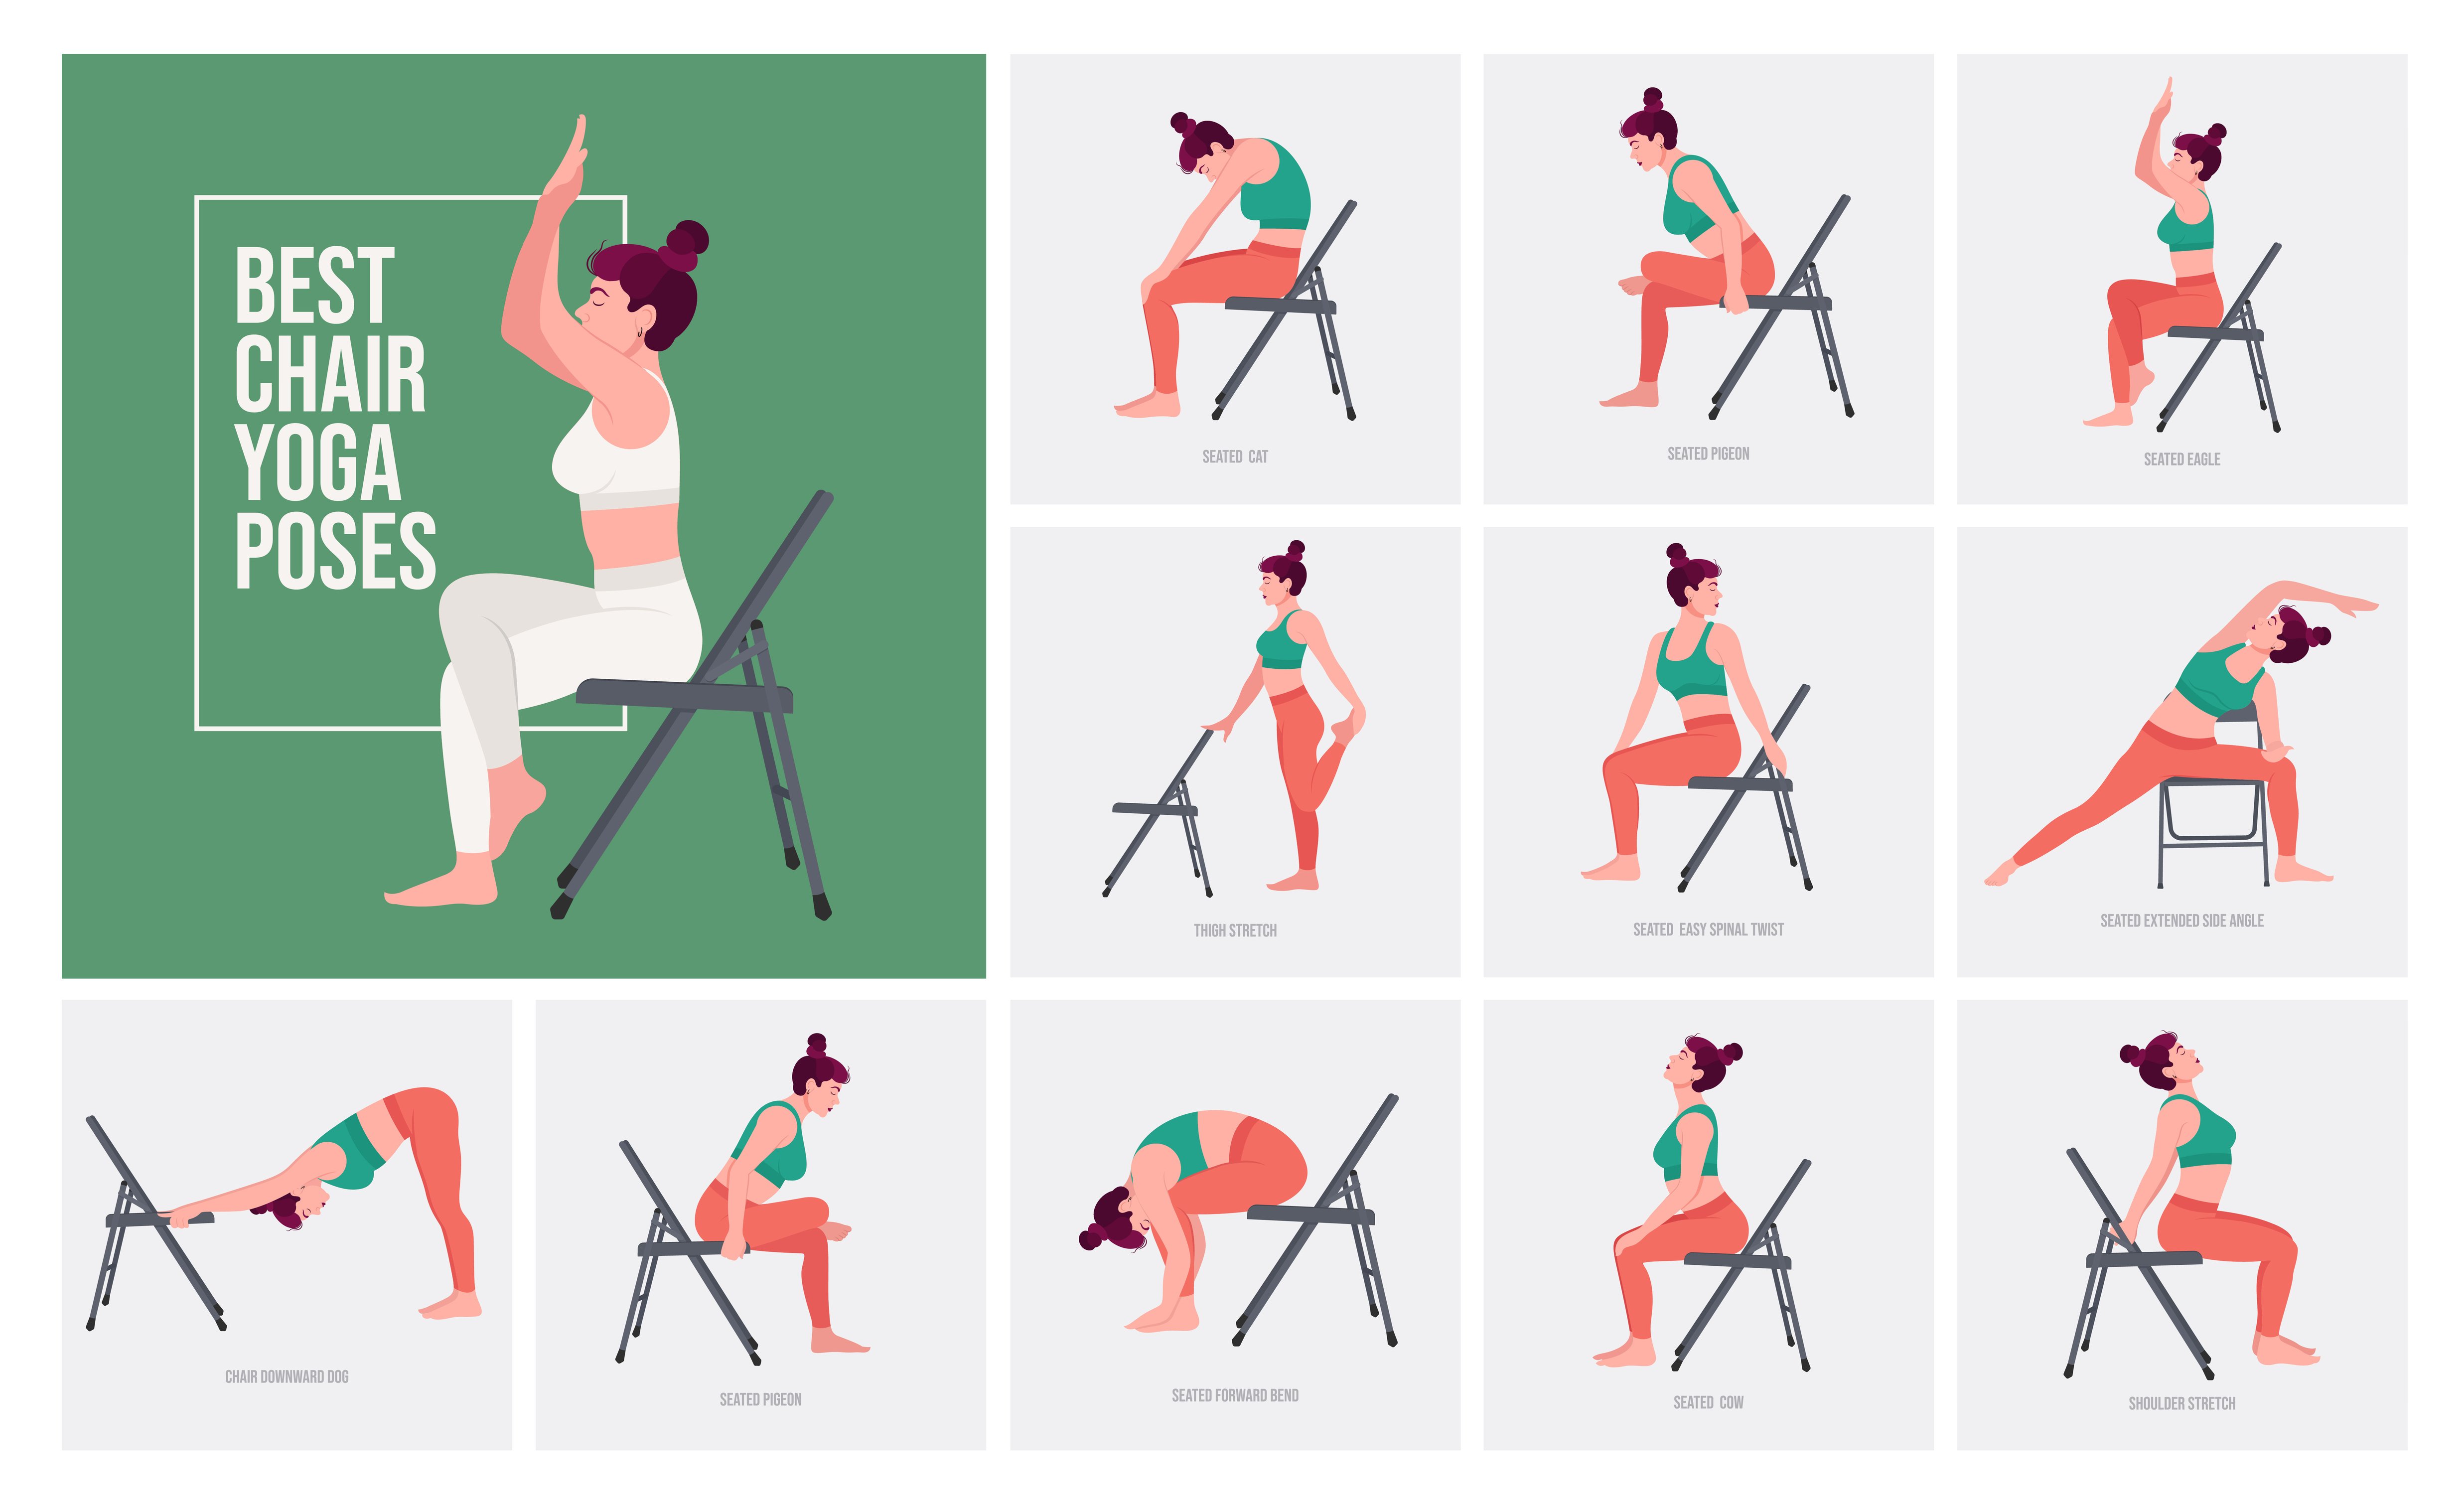 Chair Yoga for Seniors Over 60: Rediscover the Power of your Body with  These Easy-to-Follow Stretches & Poses to Gain Mobility, Strength, Balance  & Even Lose Weight with Serenity and Peace of